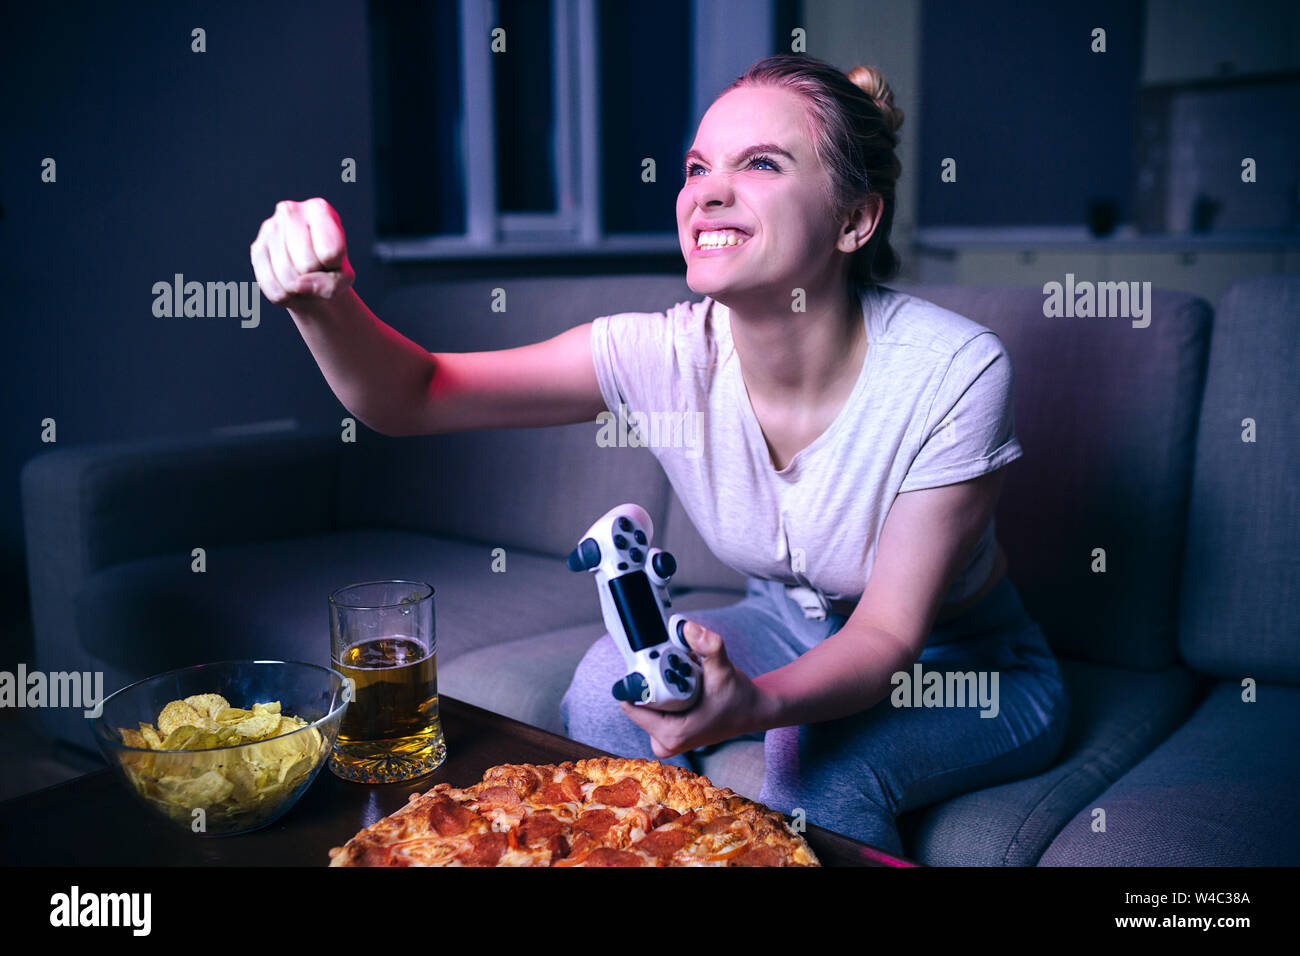 Young woman playing game at night. Angry cheering model hold hand in fist.  Gamepad. Junk food on table. Emotional intence woman Stock Photo - Alamy